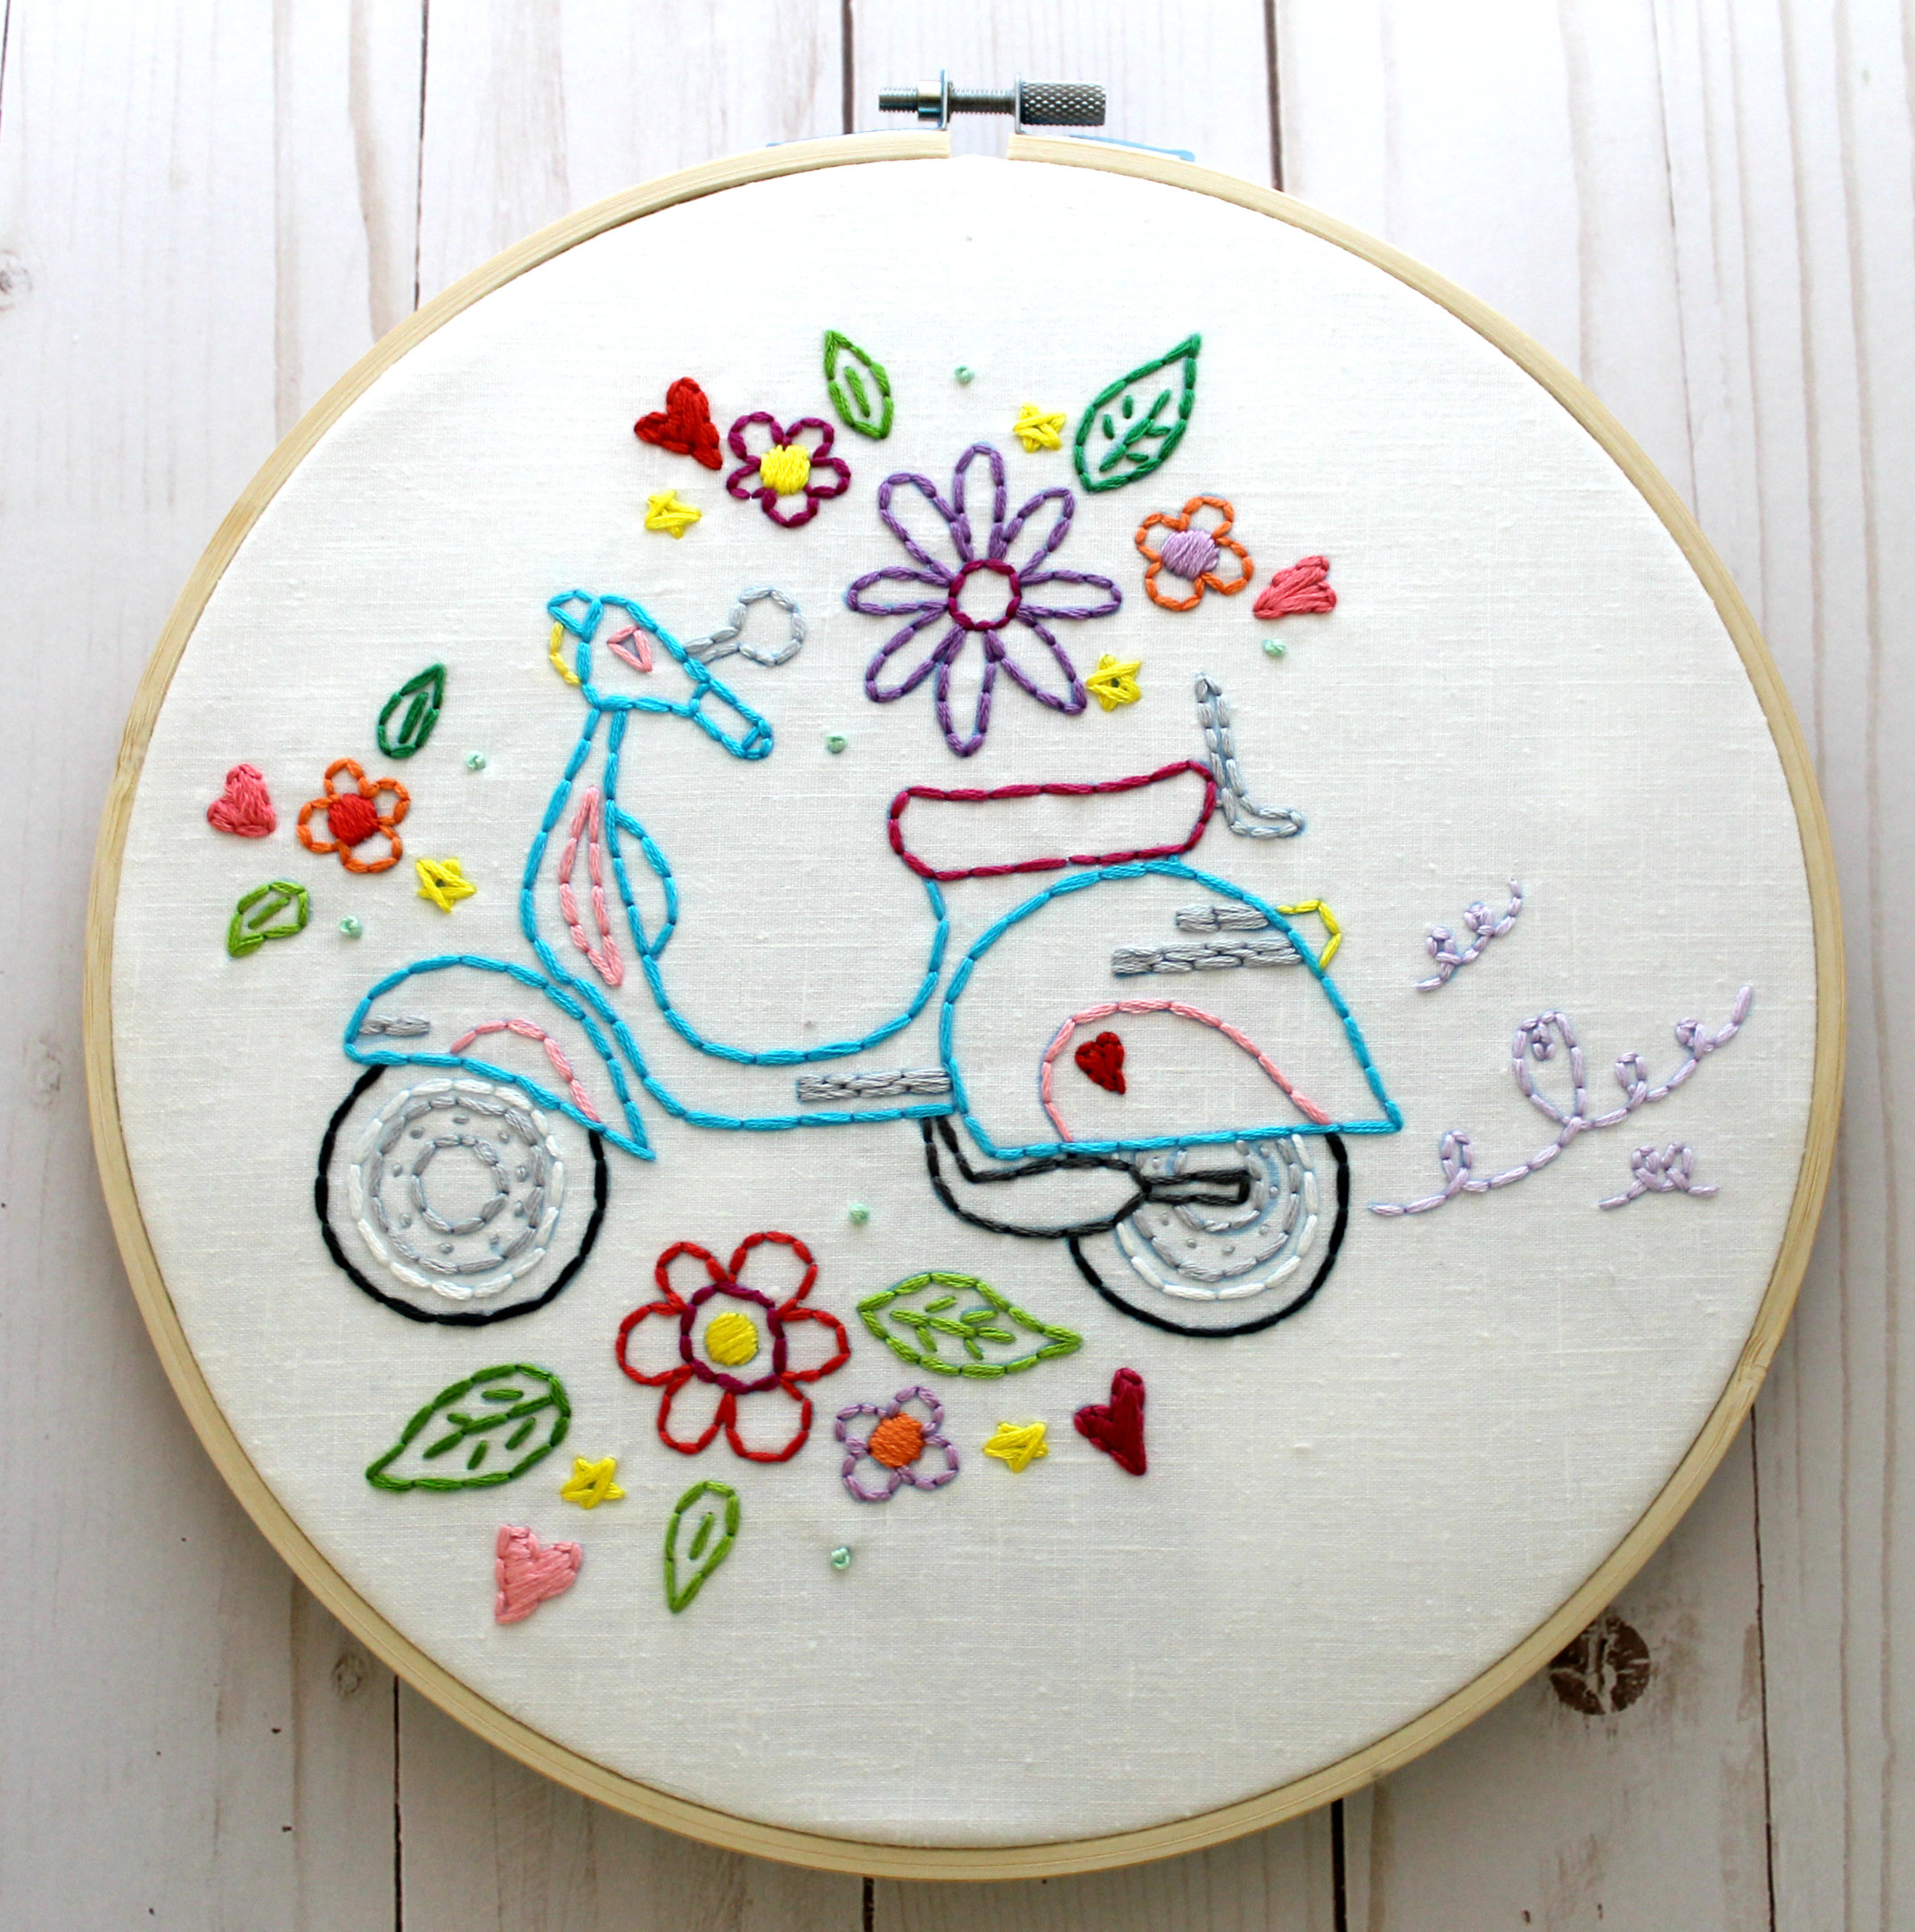 Embroidery Pattern Retro Scooter Hand Embroidery Pattern Embroidery Designs Embroidery Transfer Digital Pattern Summer Vespa Scooter Vintage Scooter